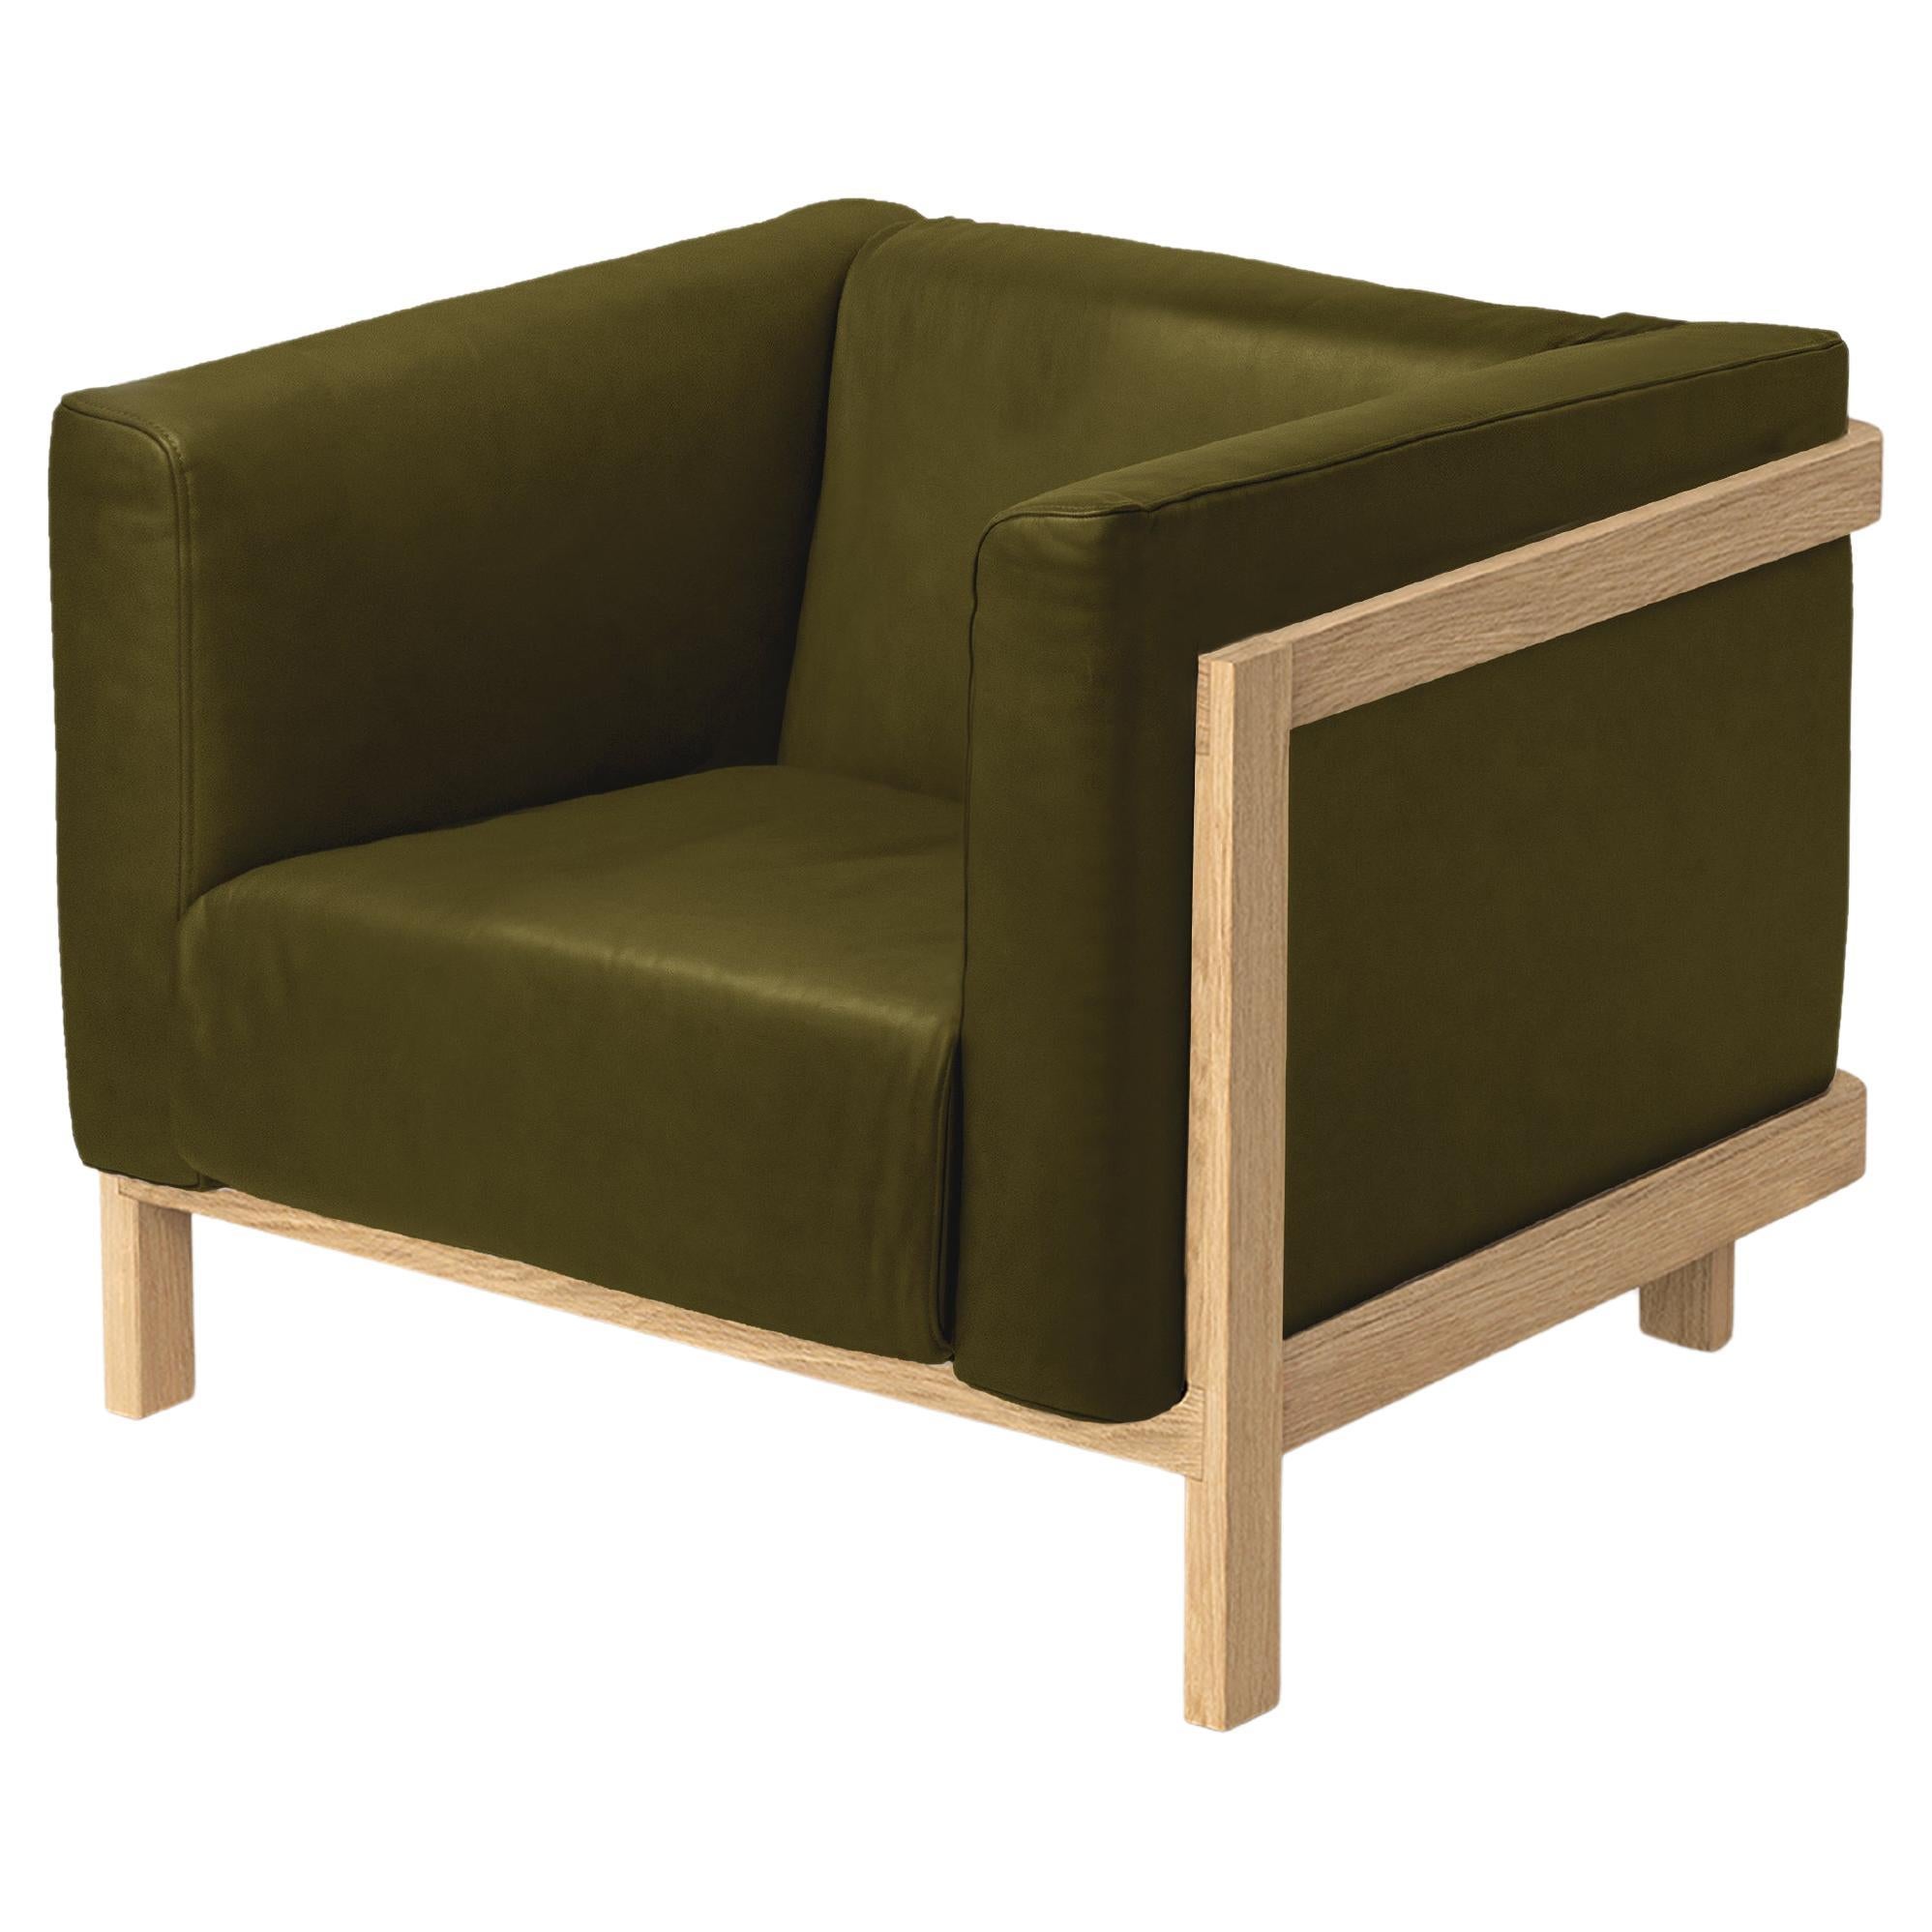 Minimalist one seater sofa oak - leather upholstered For Sale